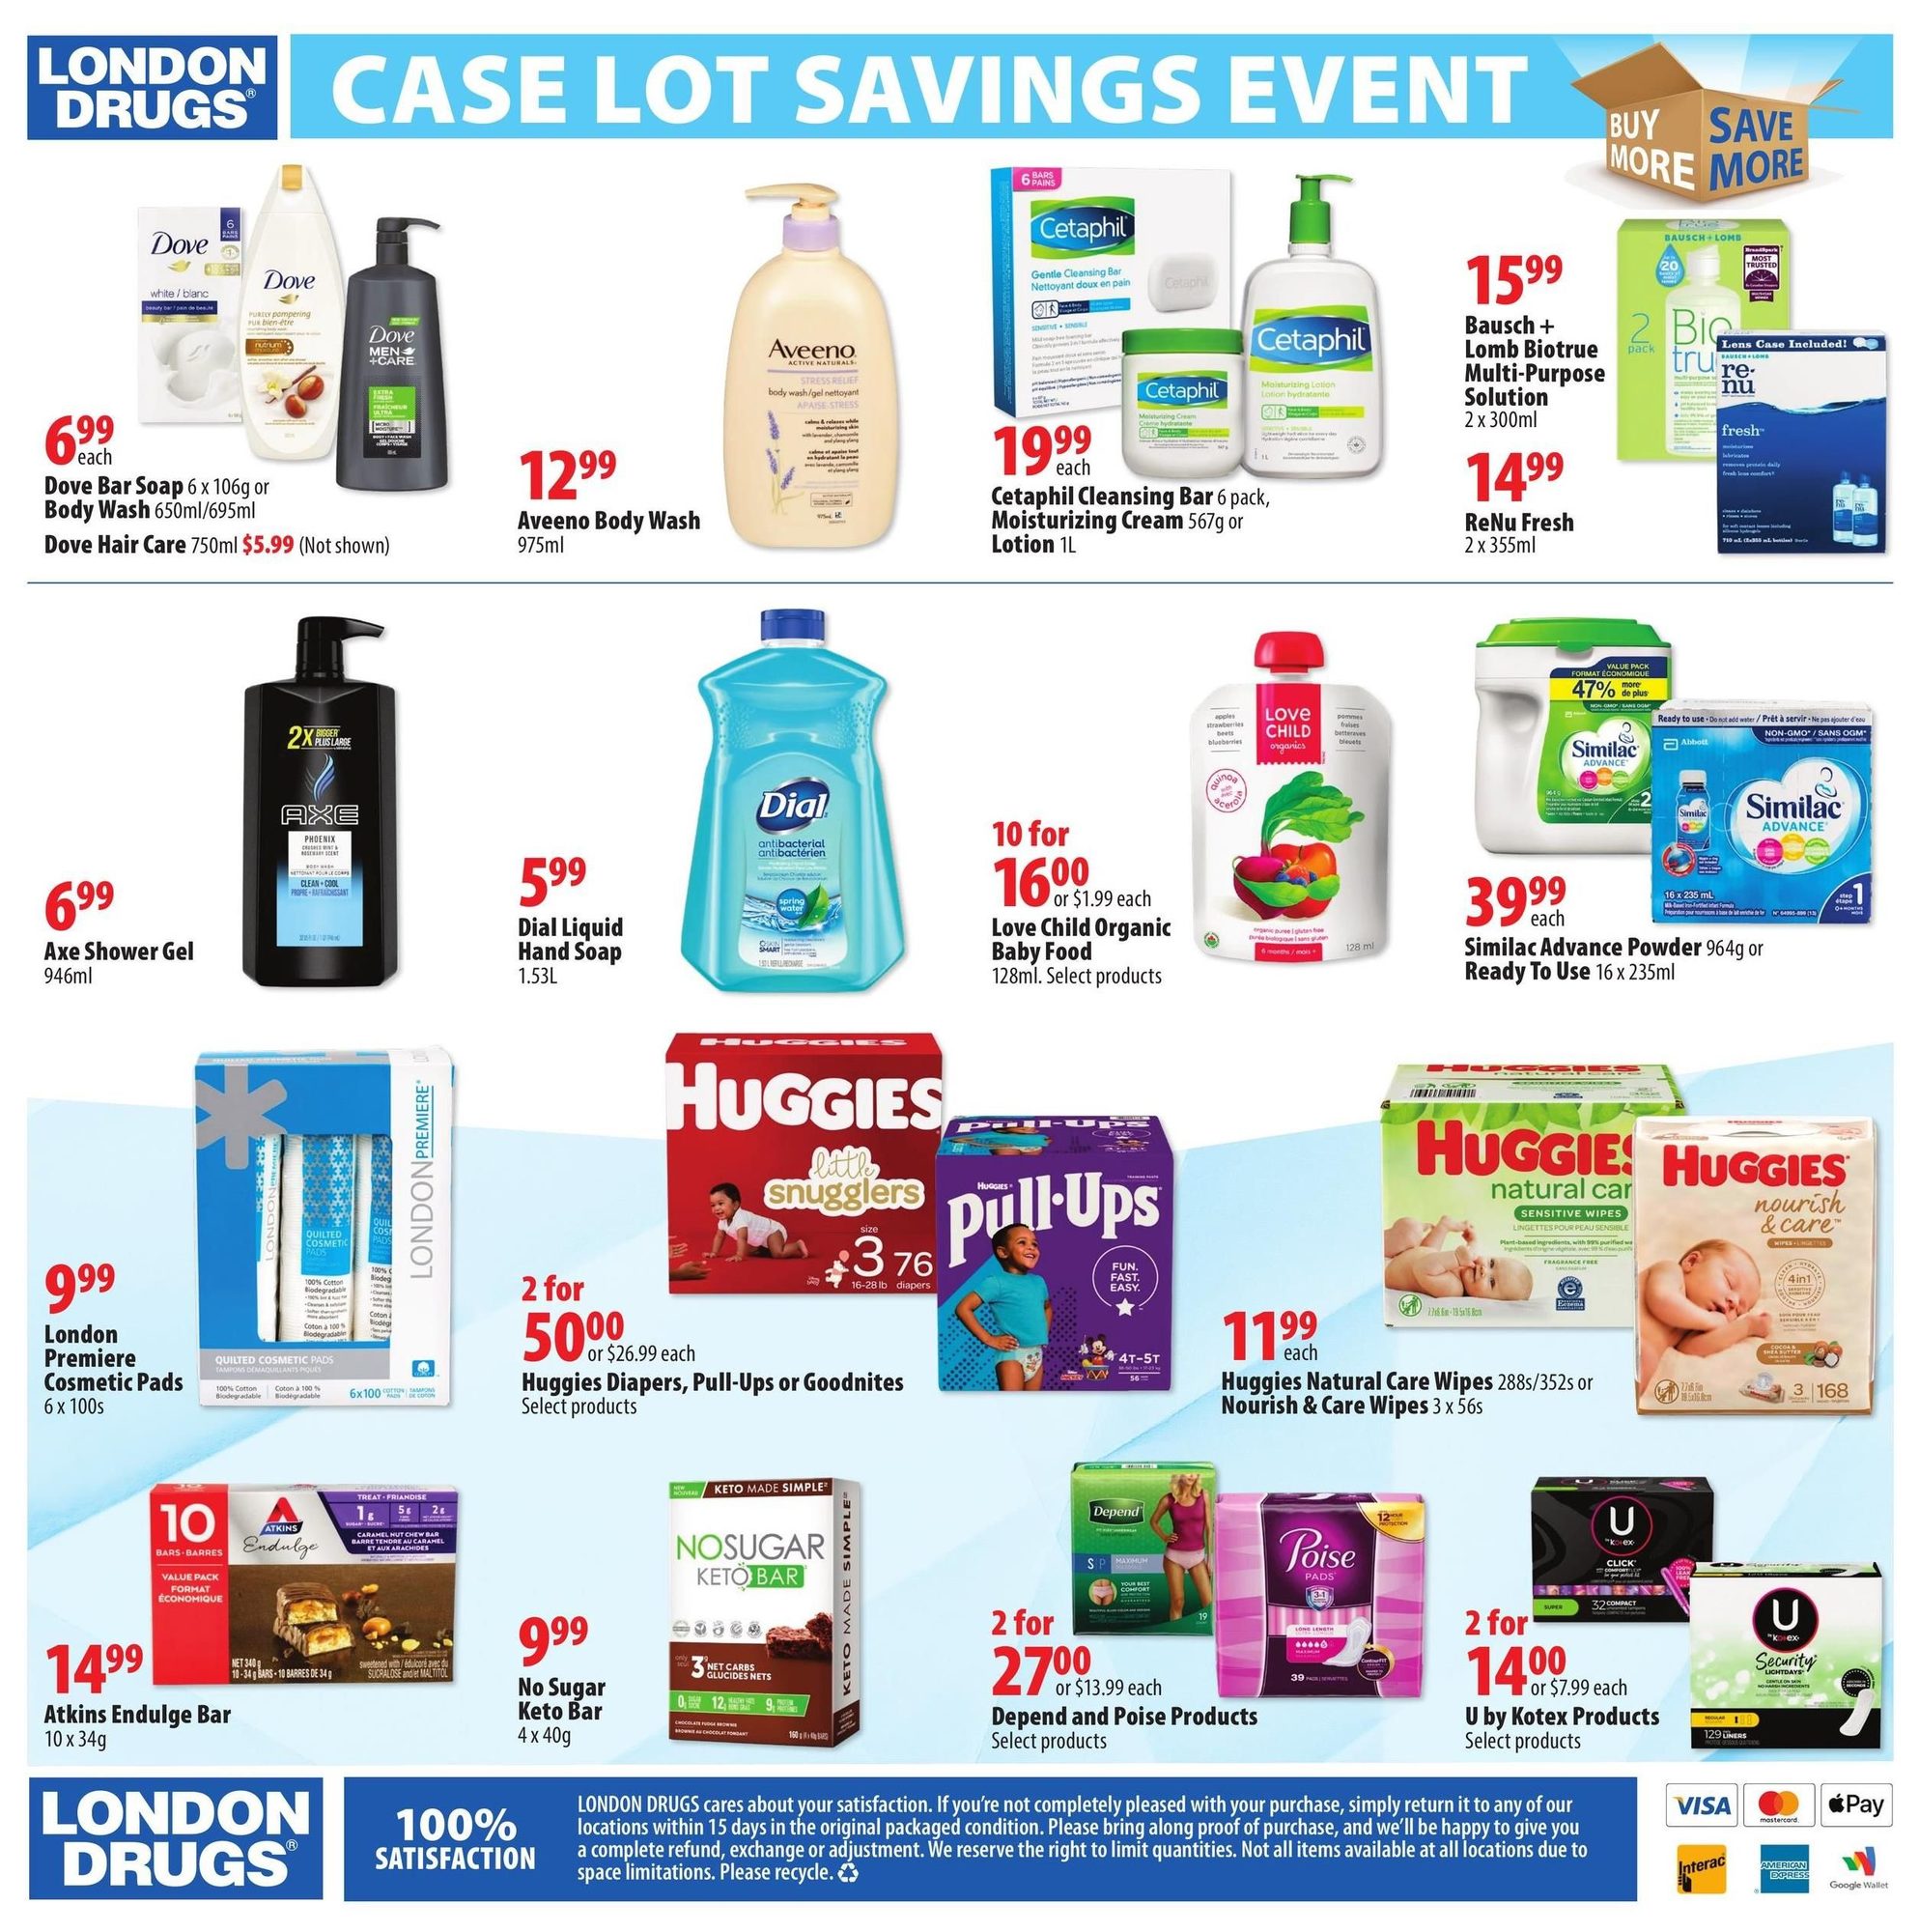 London Drugs - Case Lot Savings Event - Page 4